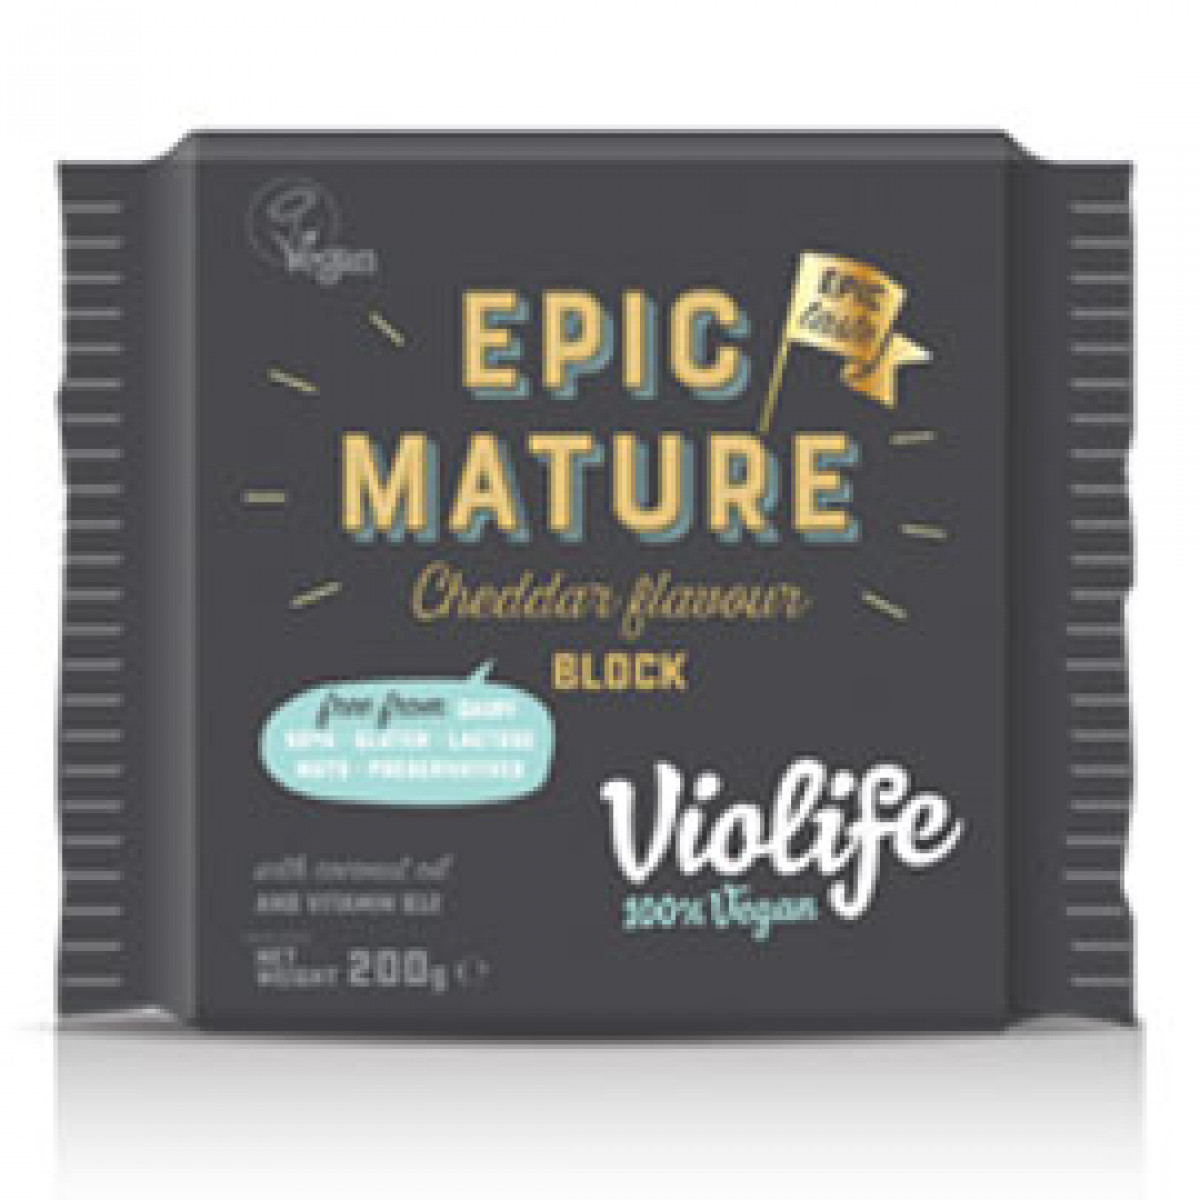 Product picture for Epic Mature Cheddar Flavour Block